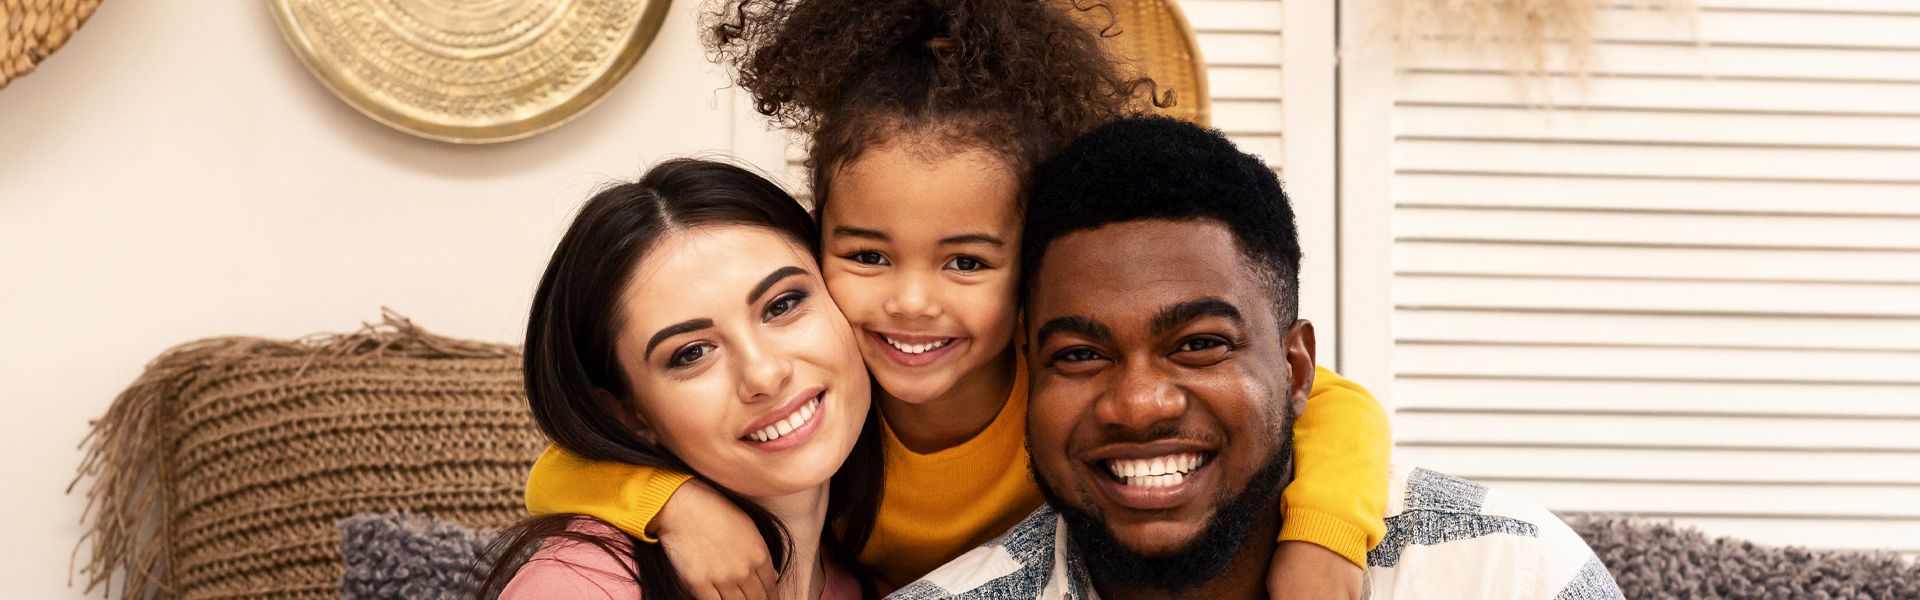 How Can You Benefit from Family Dentistry?